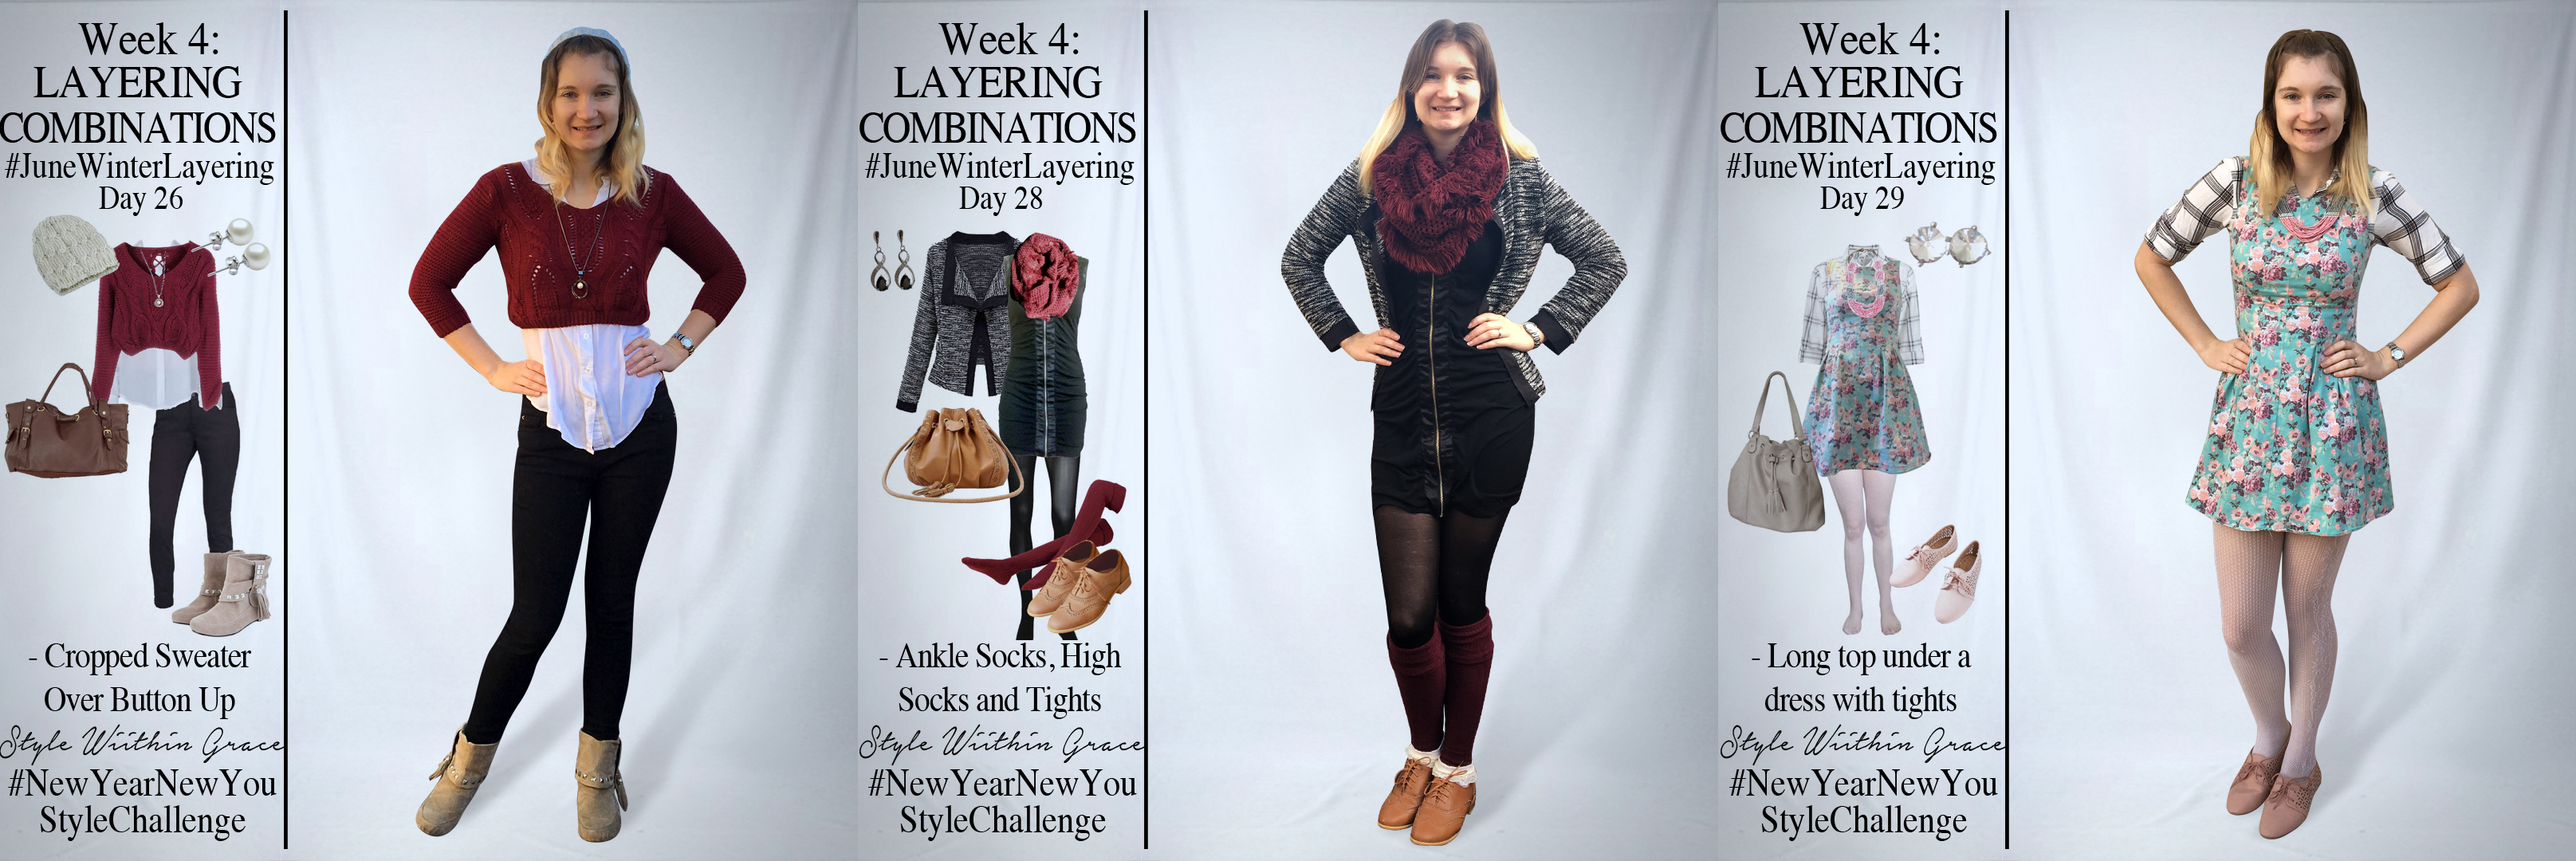 June Winter Layering Week 4 Outfit Ideas